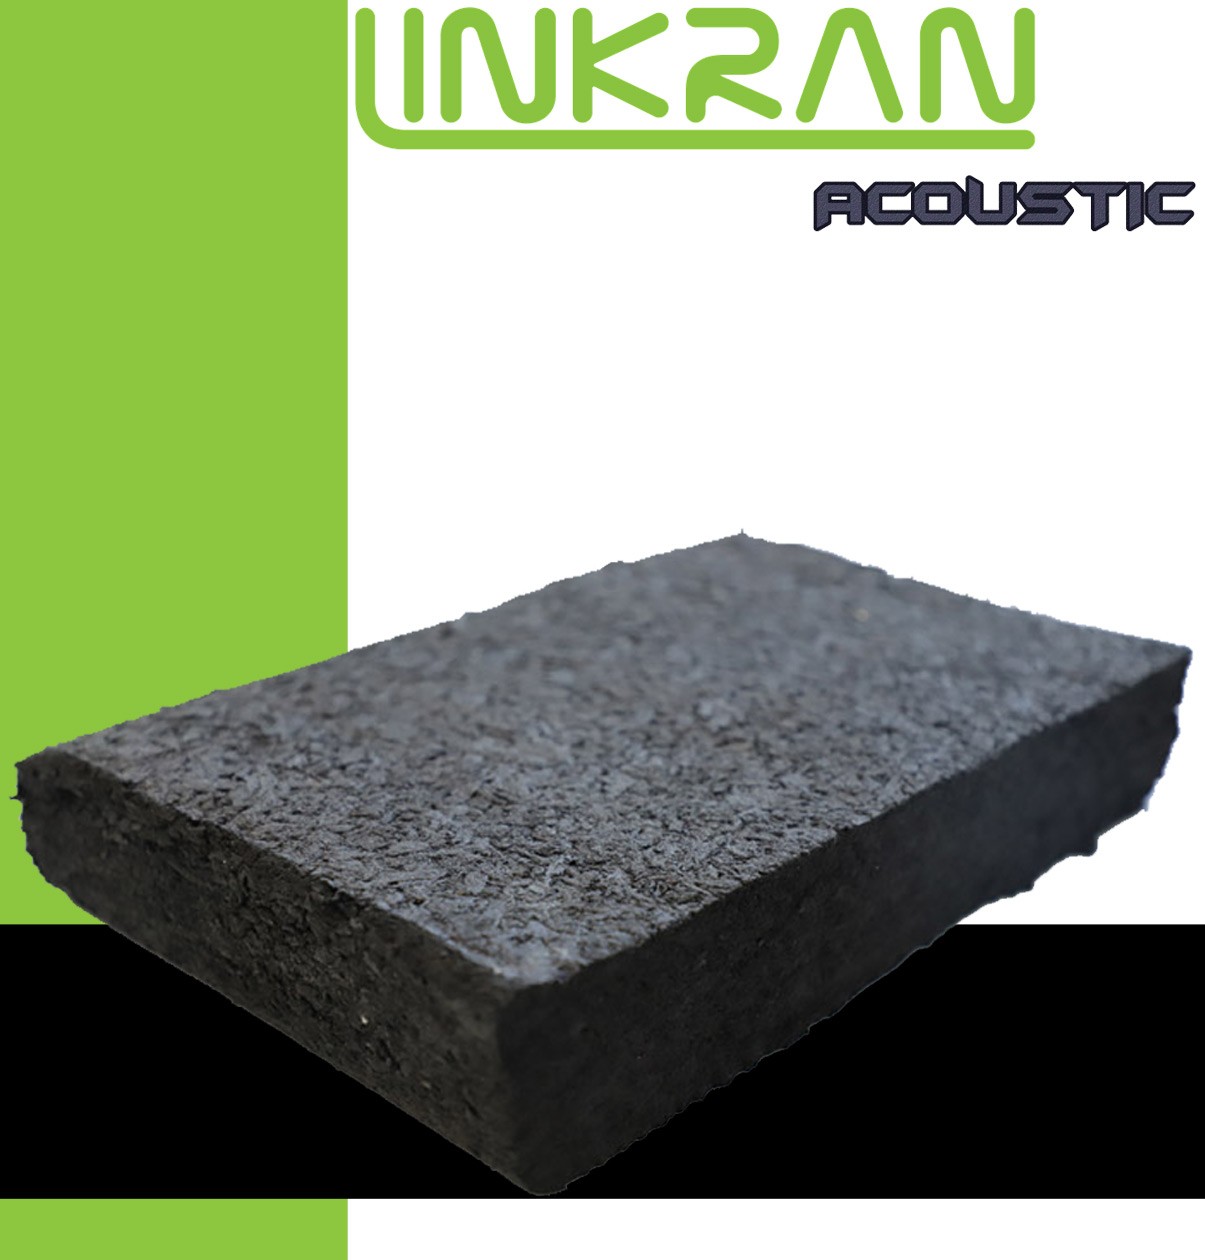 Acoustic insulation - Linkran Industrial Group